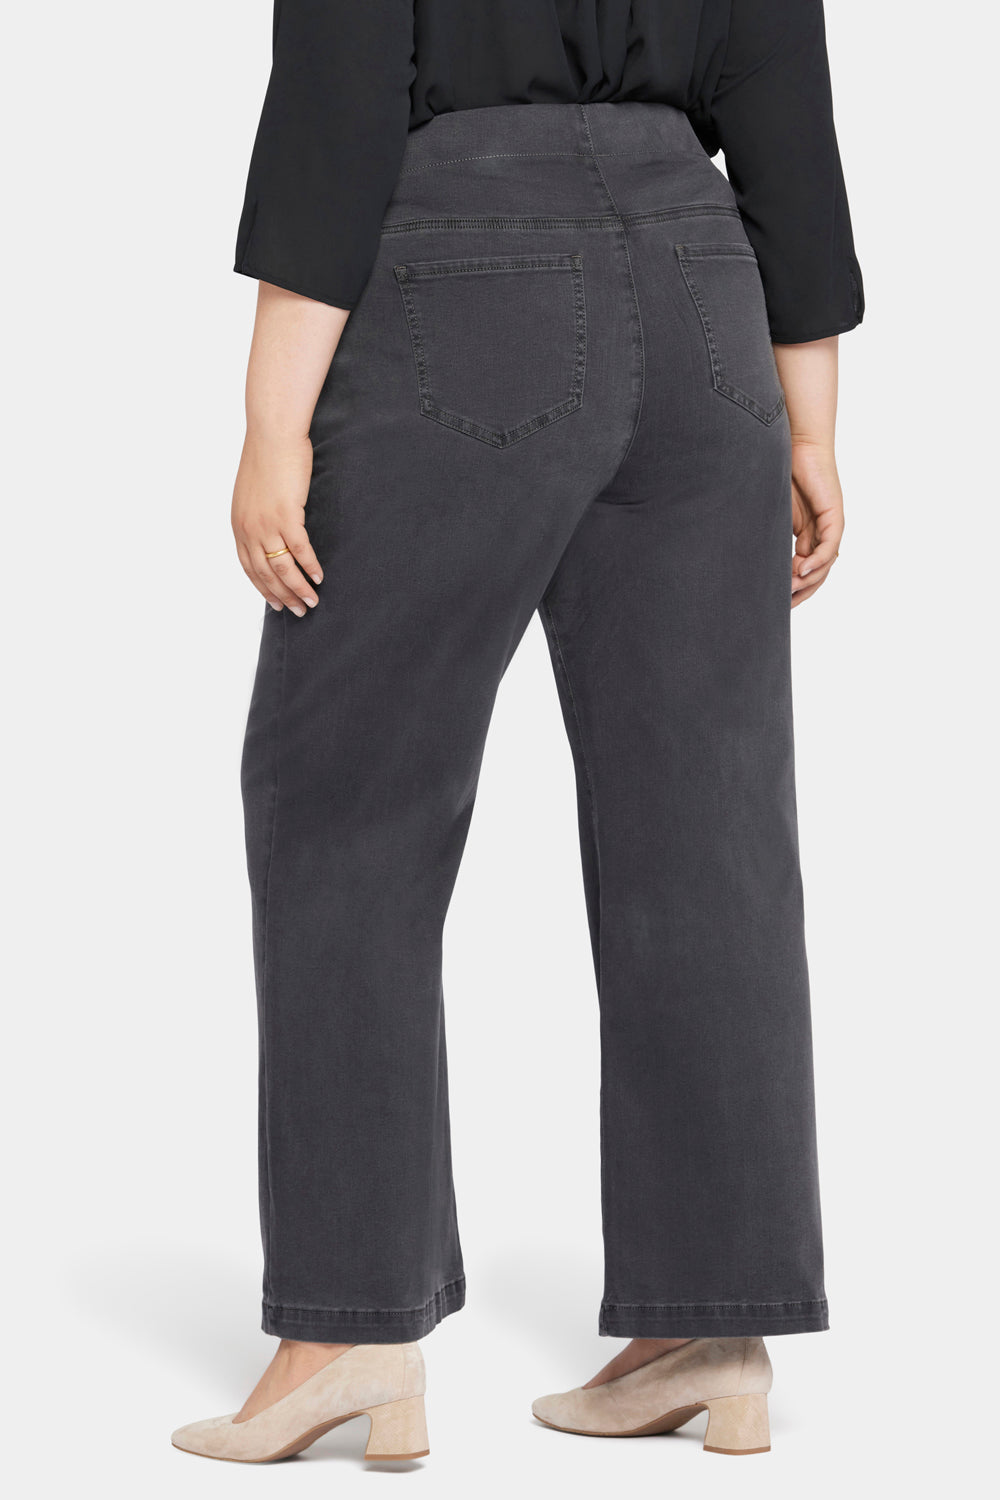 NYDJ Pull-On Teresa Wide Leg Jeans In Plus Size Sculpt-Her™ Collection - Sierra